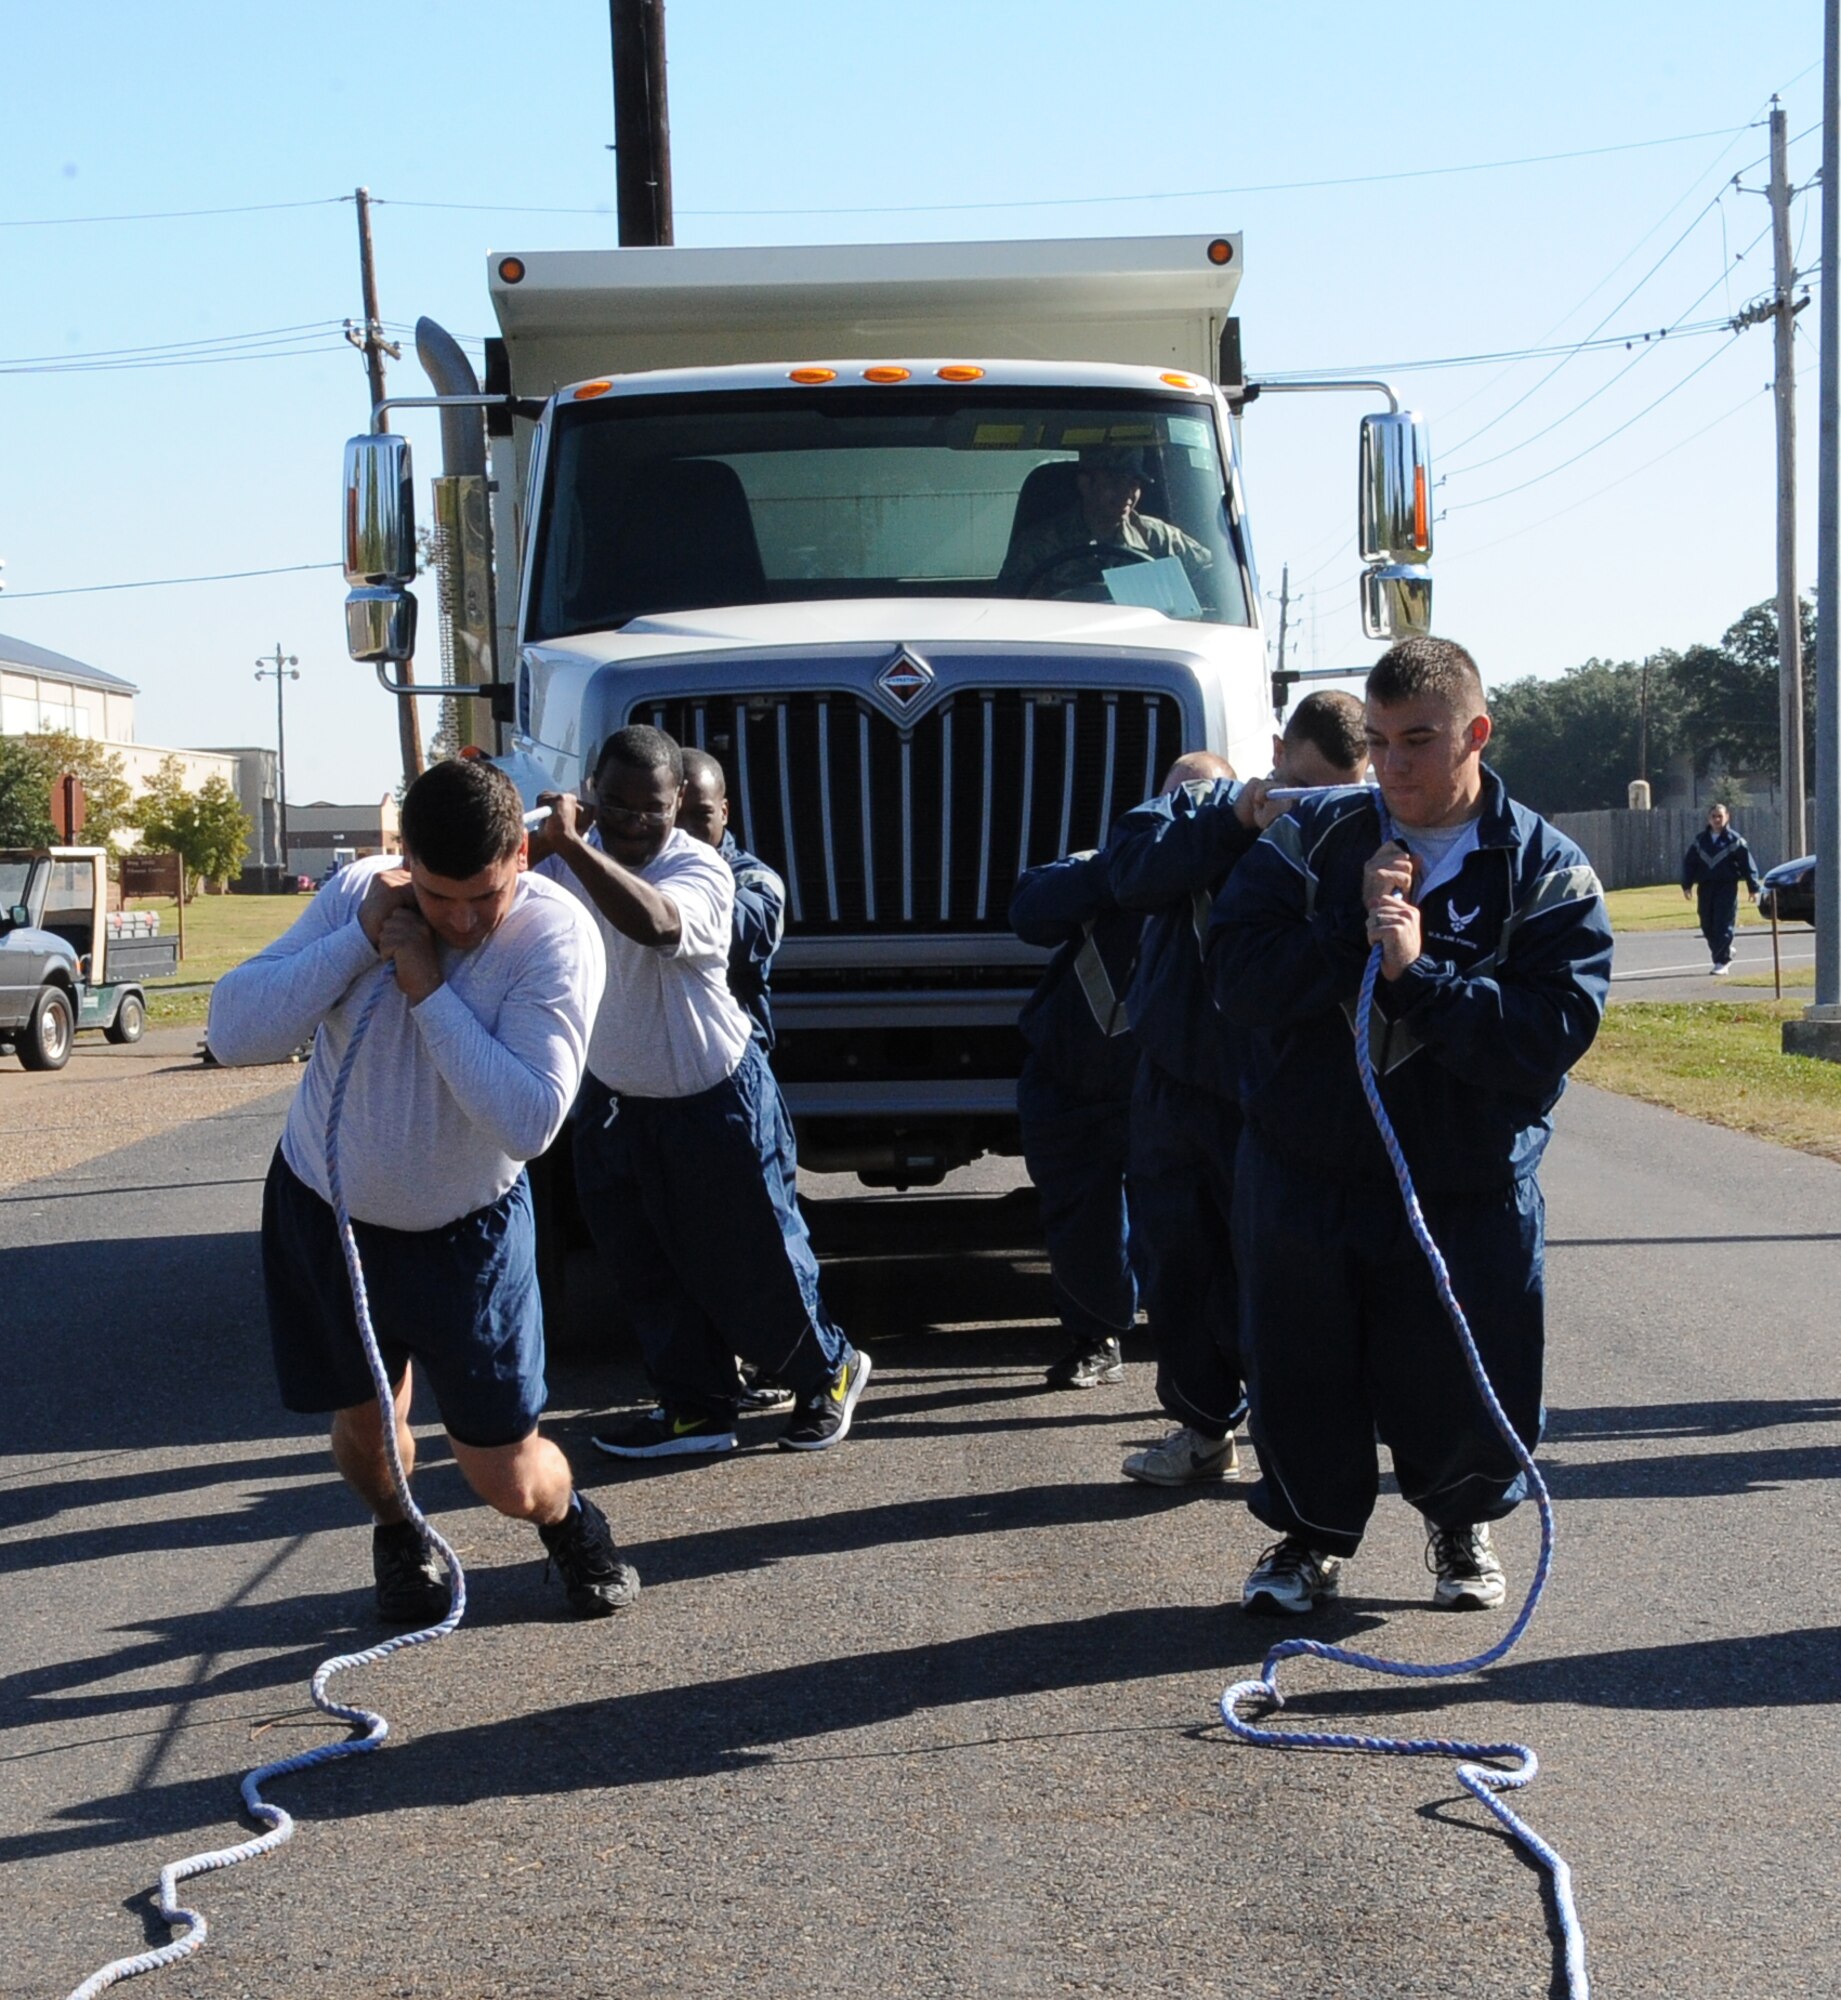 Airmen from the 2nd Civil Engineer Squadron pull a dump truck during the 2012 Sports Day on Barksdale Air Force Base, La., Nov. 16. The annual event gave Airmen the opportunity to participate in several individual and team sports throughout the day boosting morale. (U.S. Air Force photo/Airman 1st Class Benjamin Gonsier)(RELEASED)
